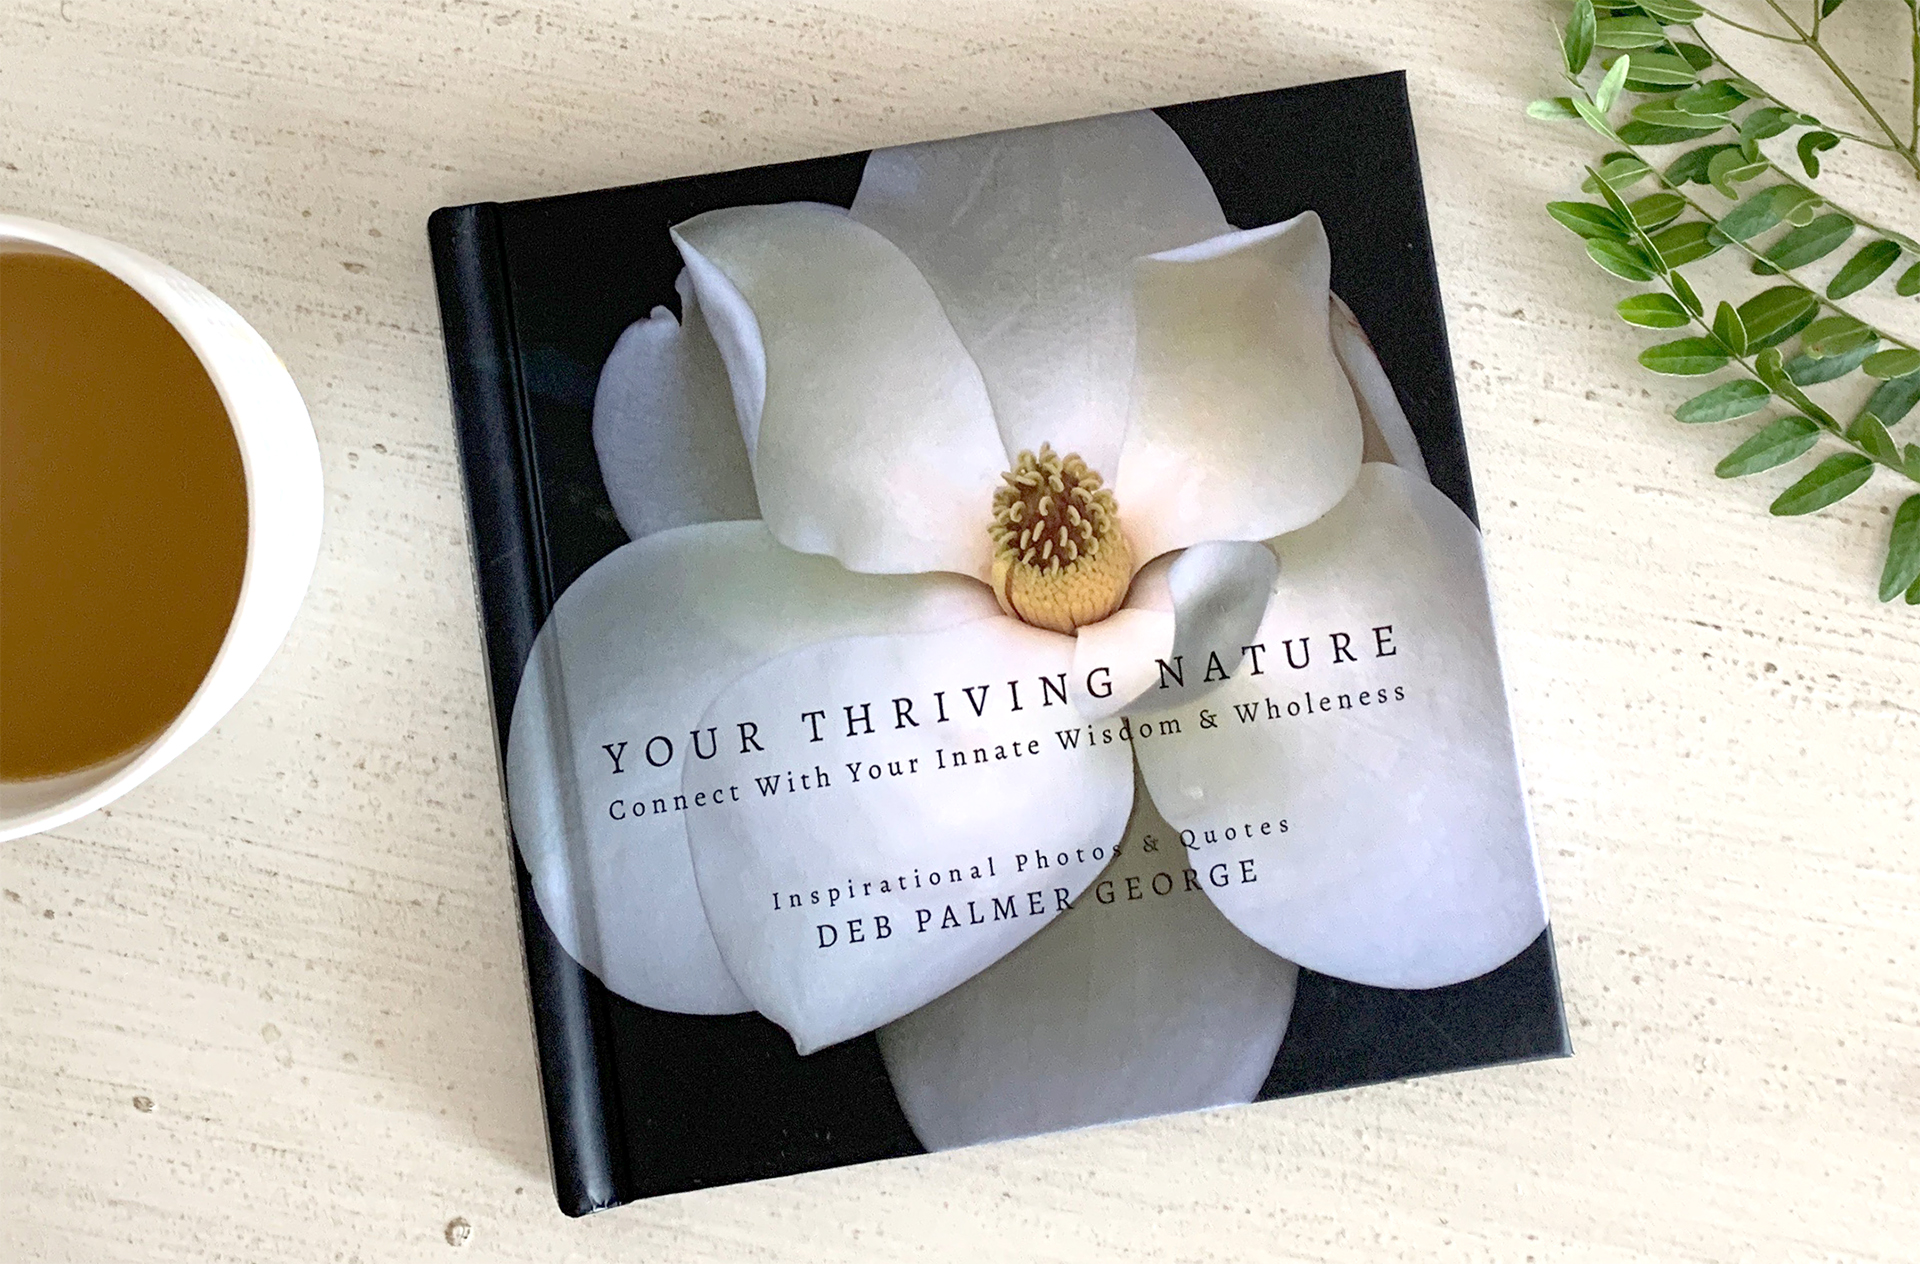 Deb Palmer George Book Your Thriving Nature